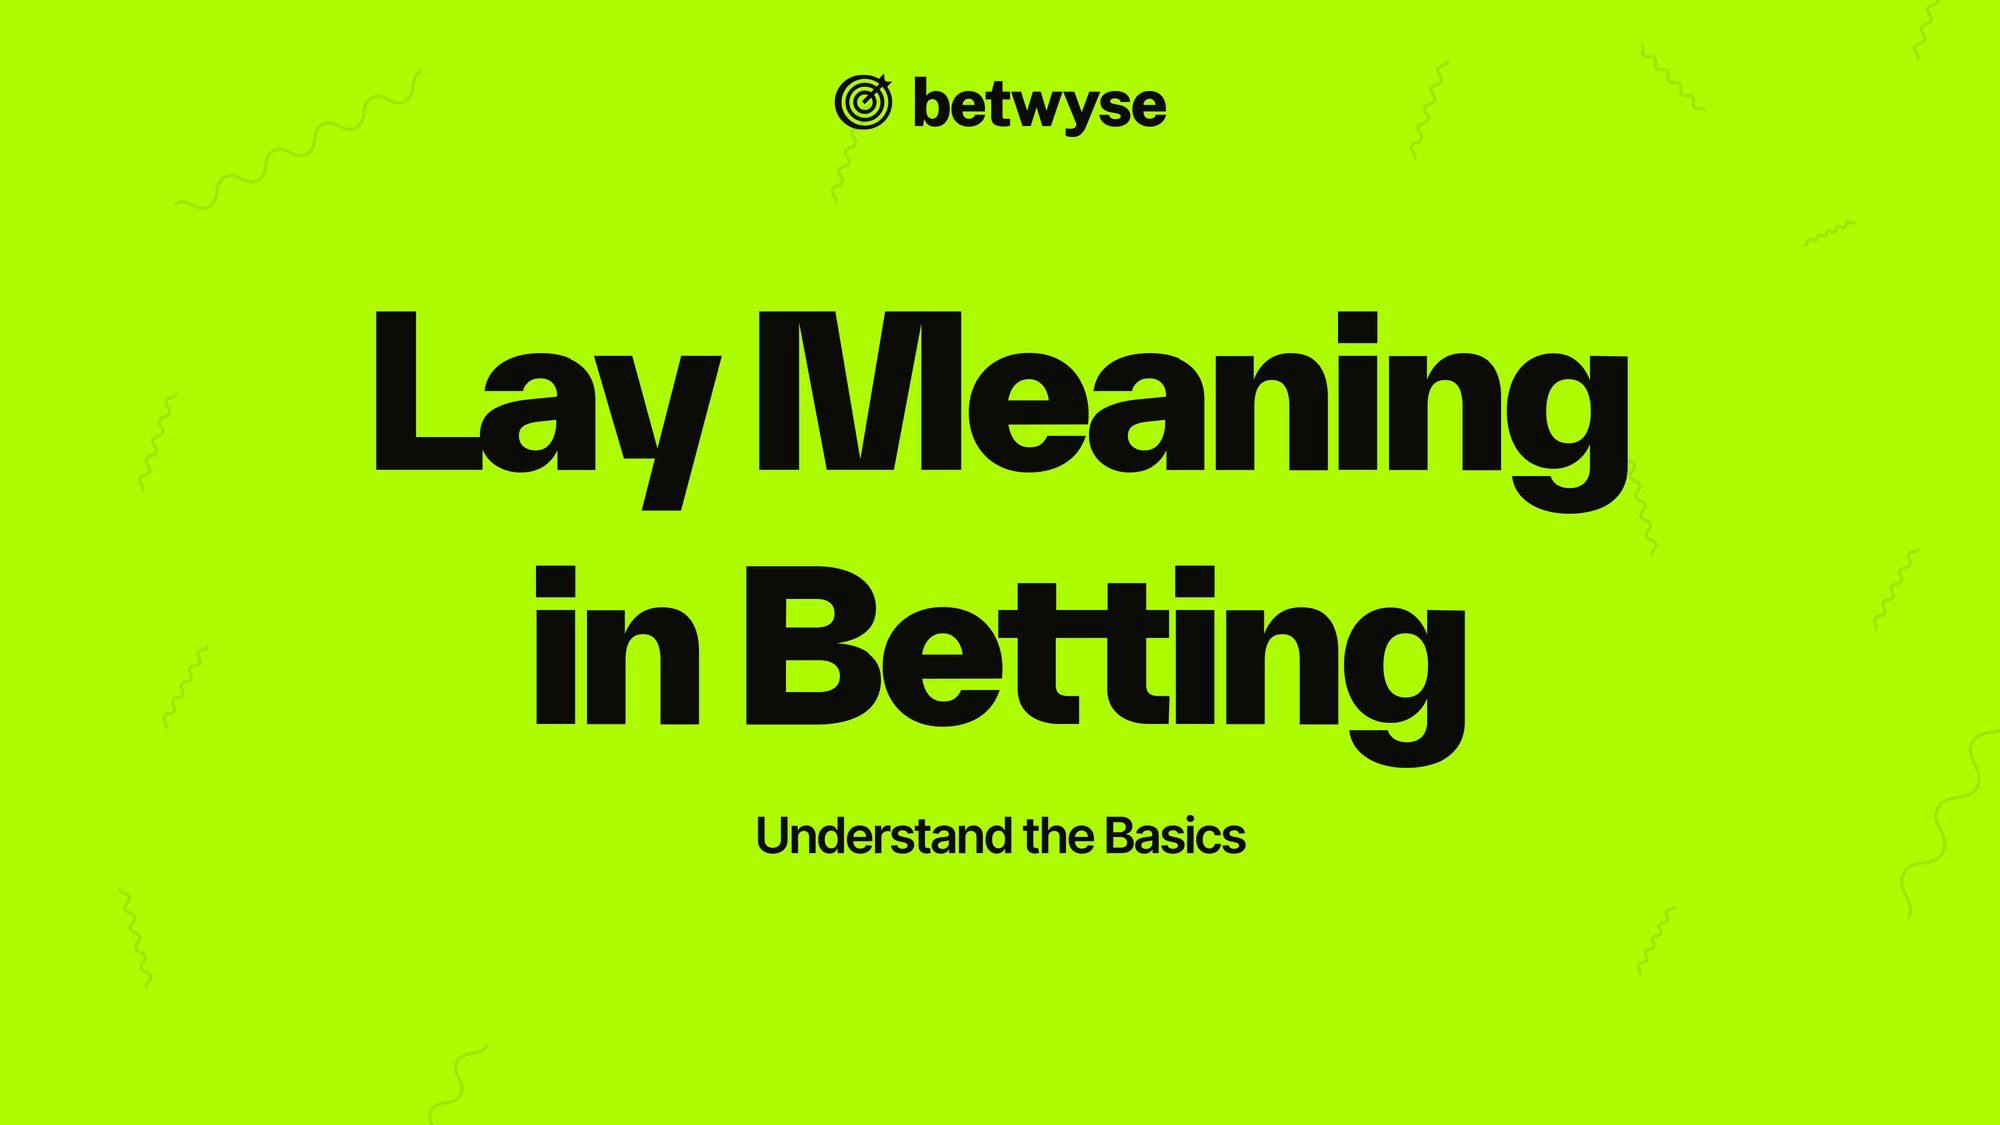 lay meaning in betting image